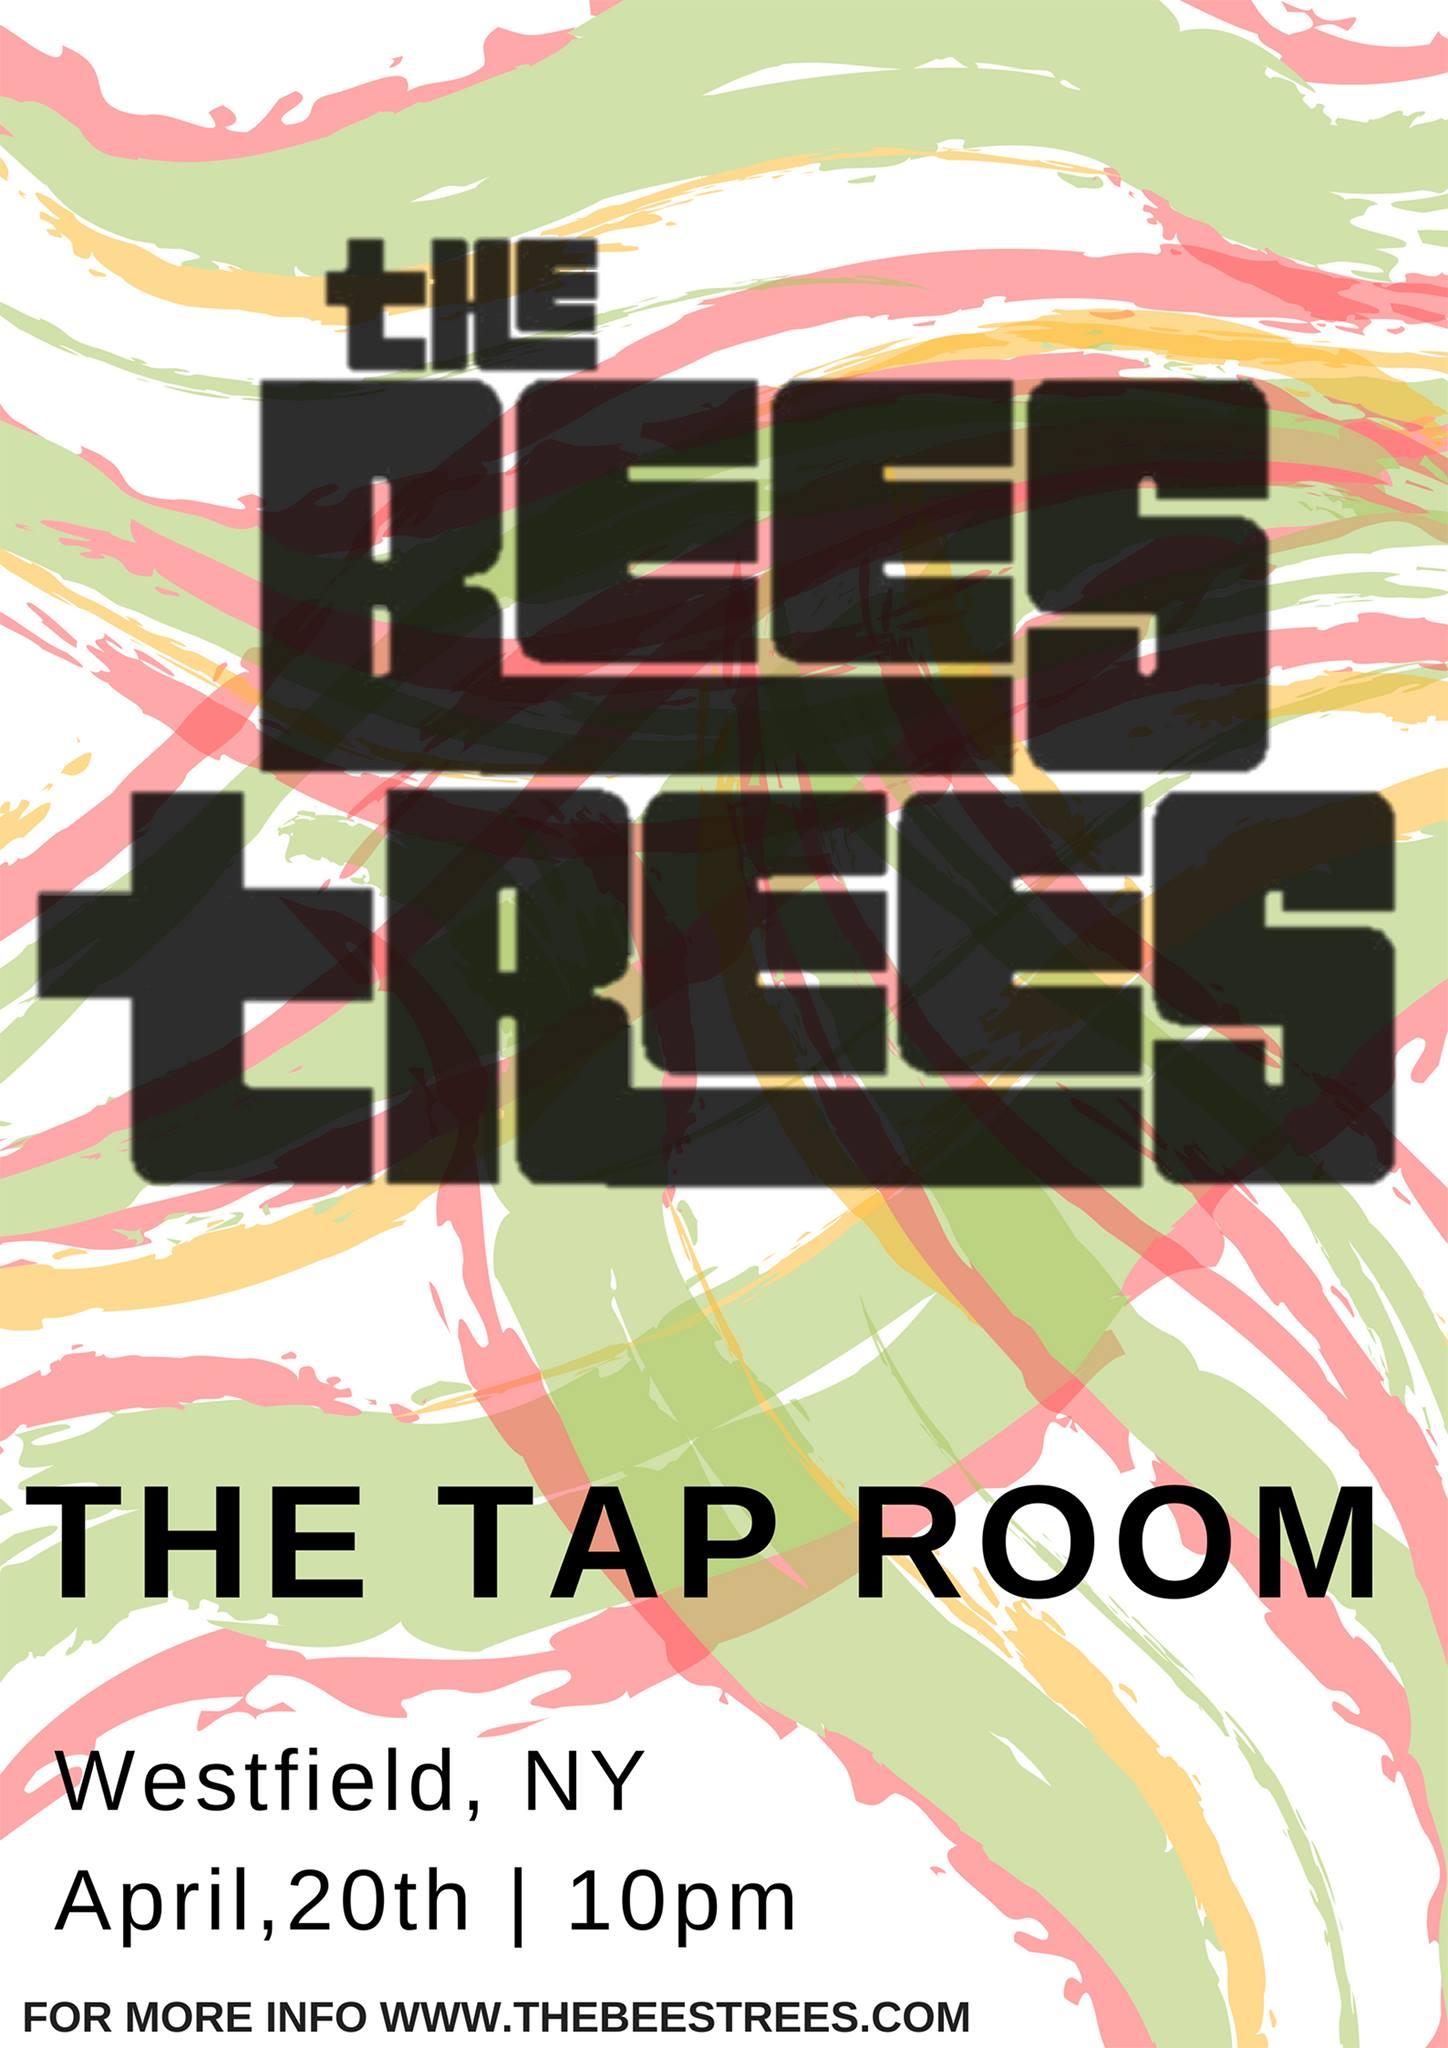 The Bees Trees